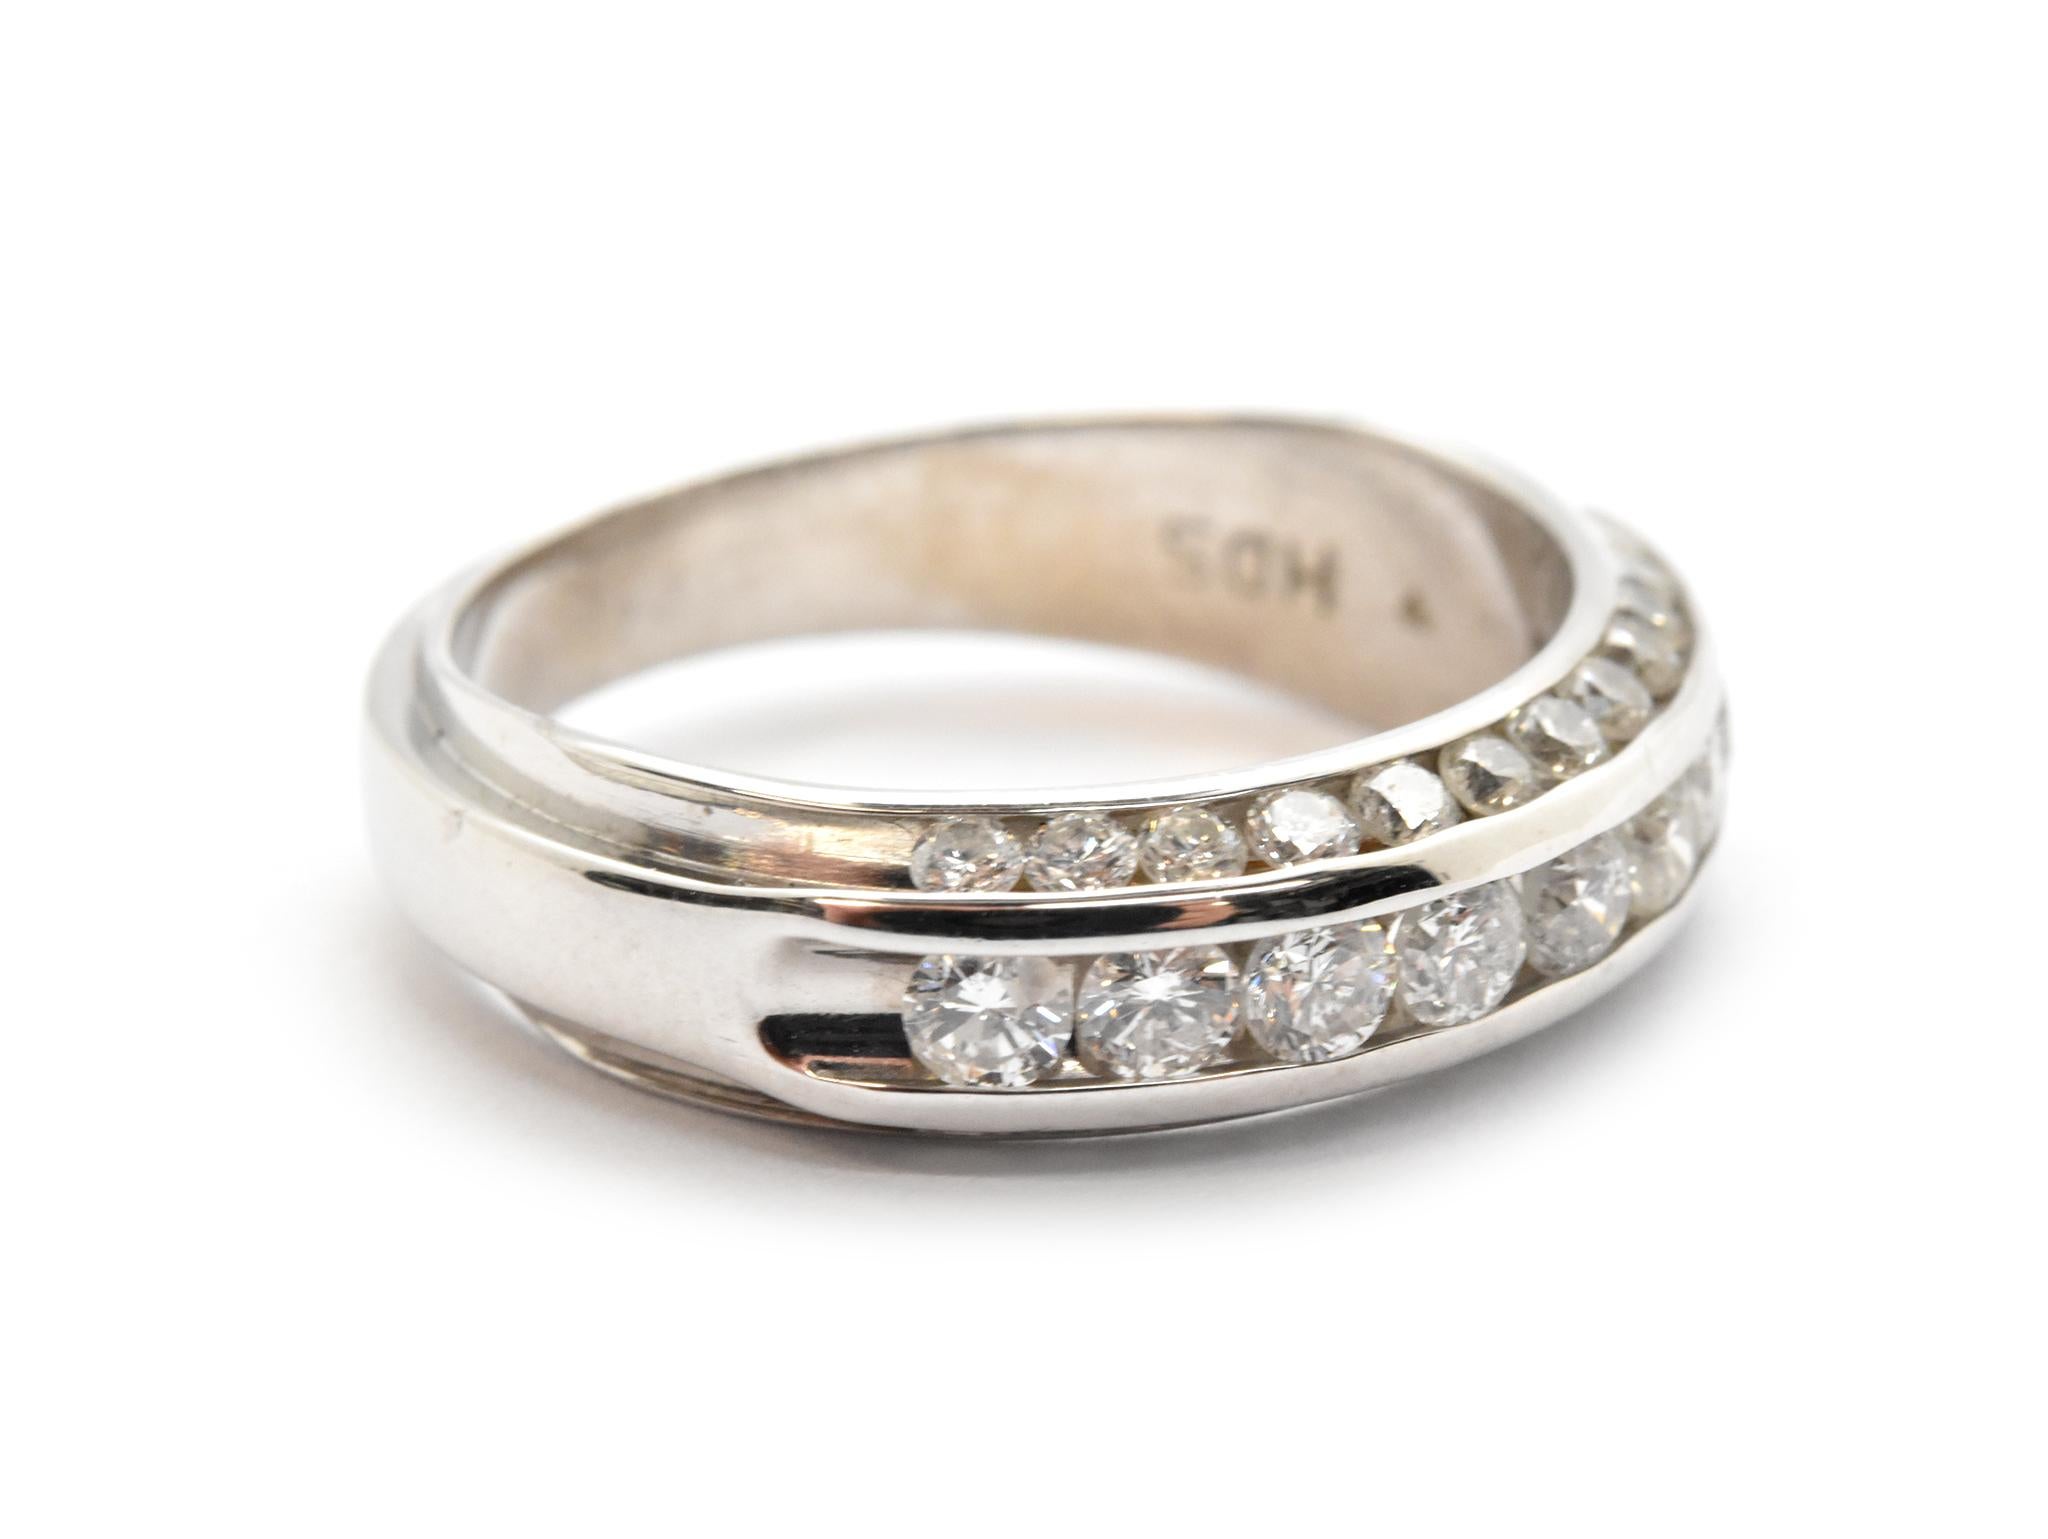 This contemporary band features a row of larger round diamonds accented by two rows of smaller round diamonds set into 14k white gold. The diamonds have a total weight of 0.95ct, and they are graded G-H in color and VS-SI in clarity. The band